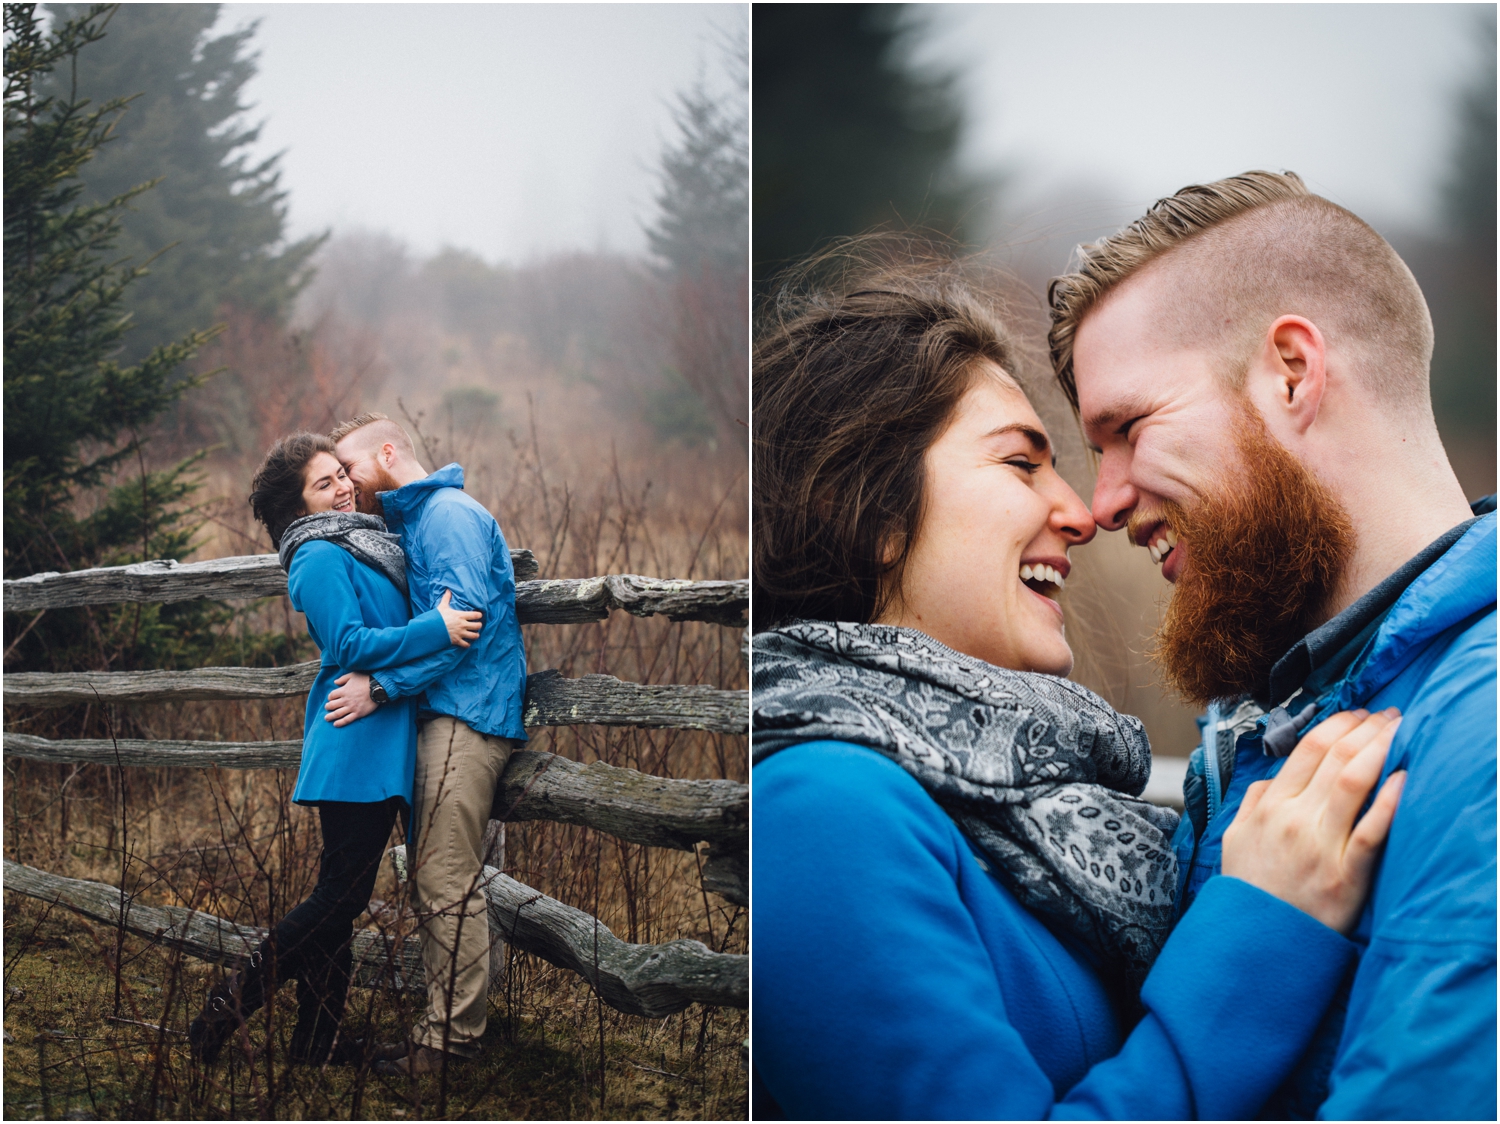 katy-sergent-photography-grayson-highlands-engagement-session-mouth-of-wilson-virginia-damascus-appalachian-trail-tennessee-wedding-elopement_0011.jpg